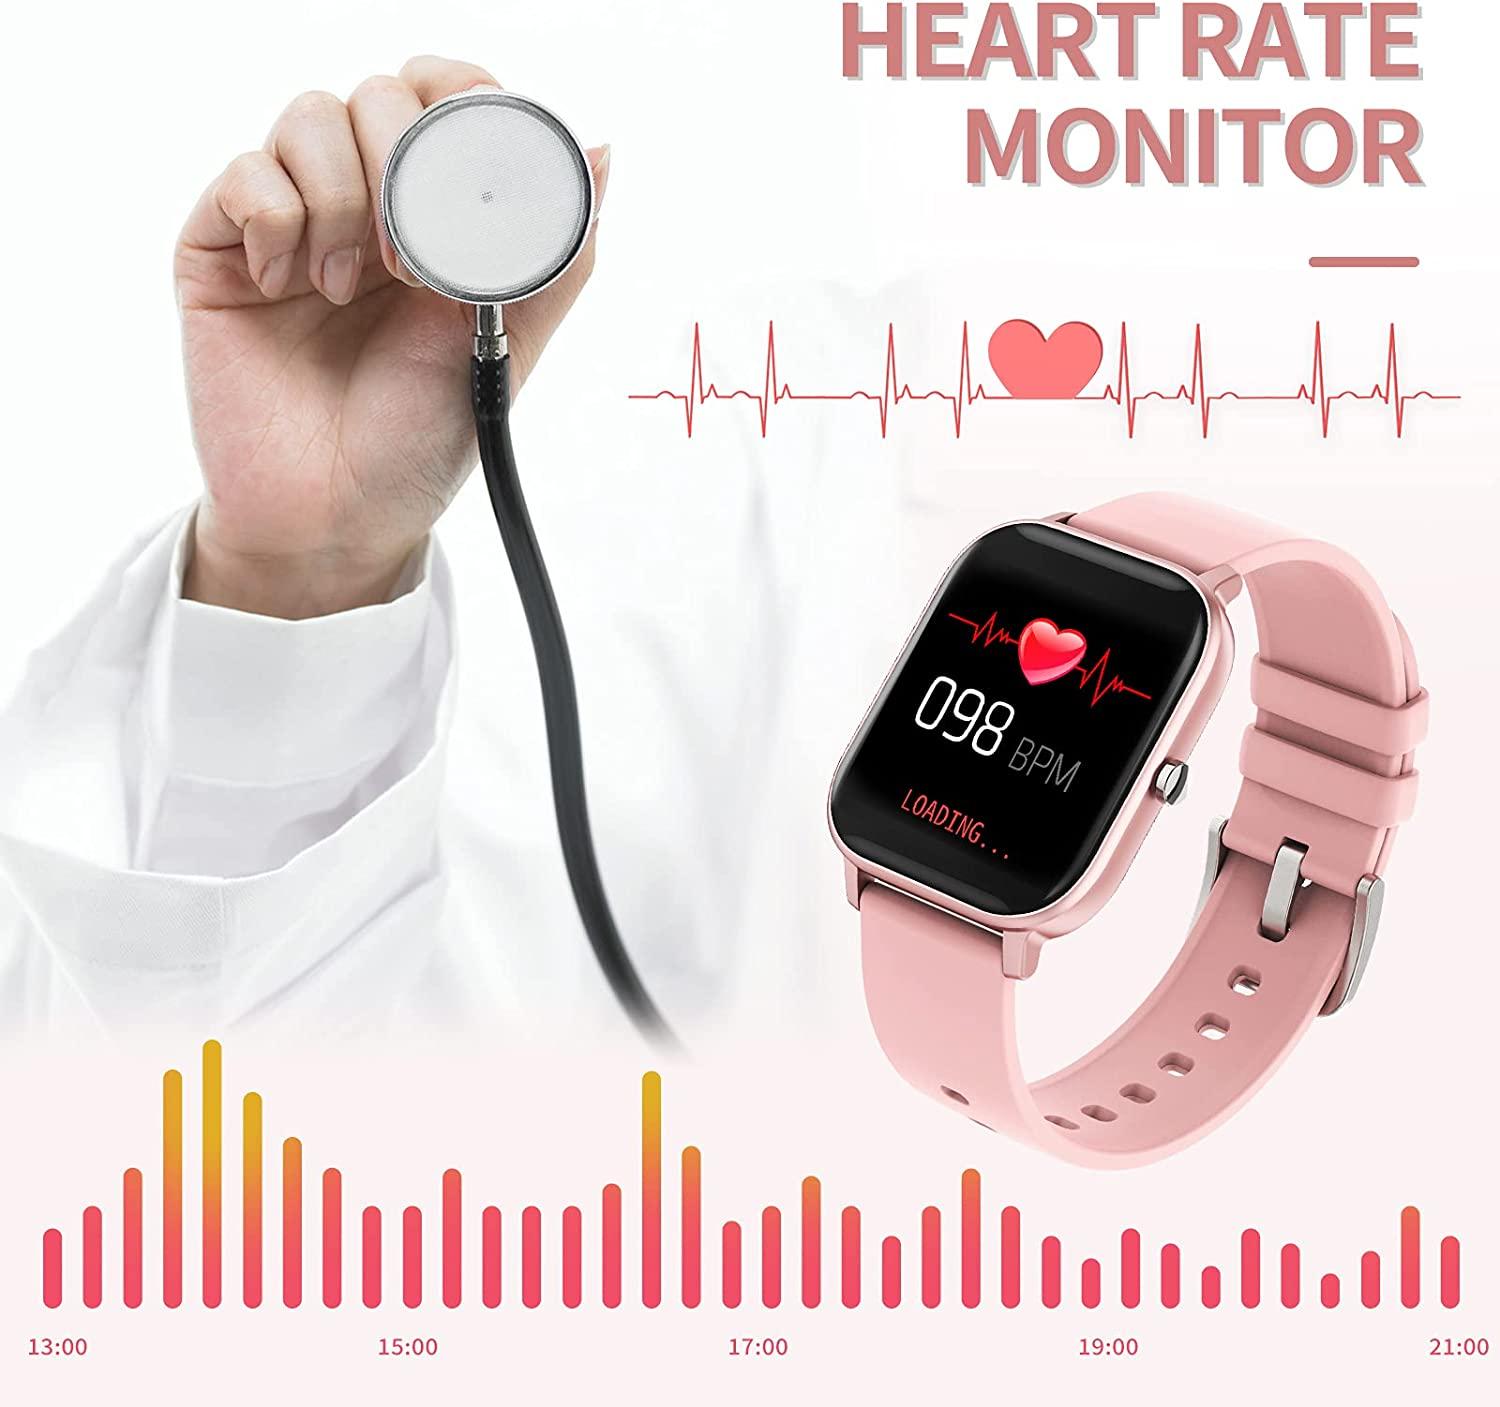 BrilliantHouse Fitness Tracker with Heart Rate Blood Pressure Blood Oxygen  Sleep Monitor Activity Tracker Health Tracker Smart Watch Pedometer for